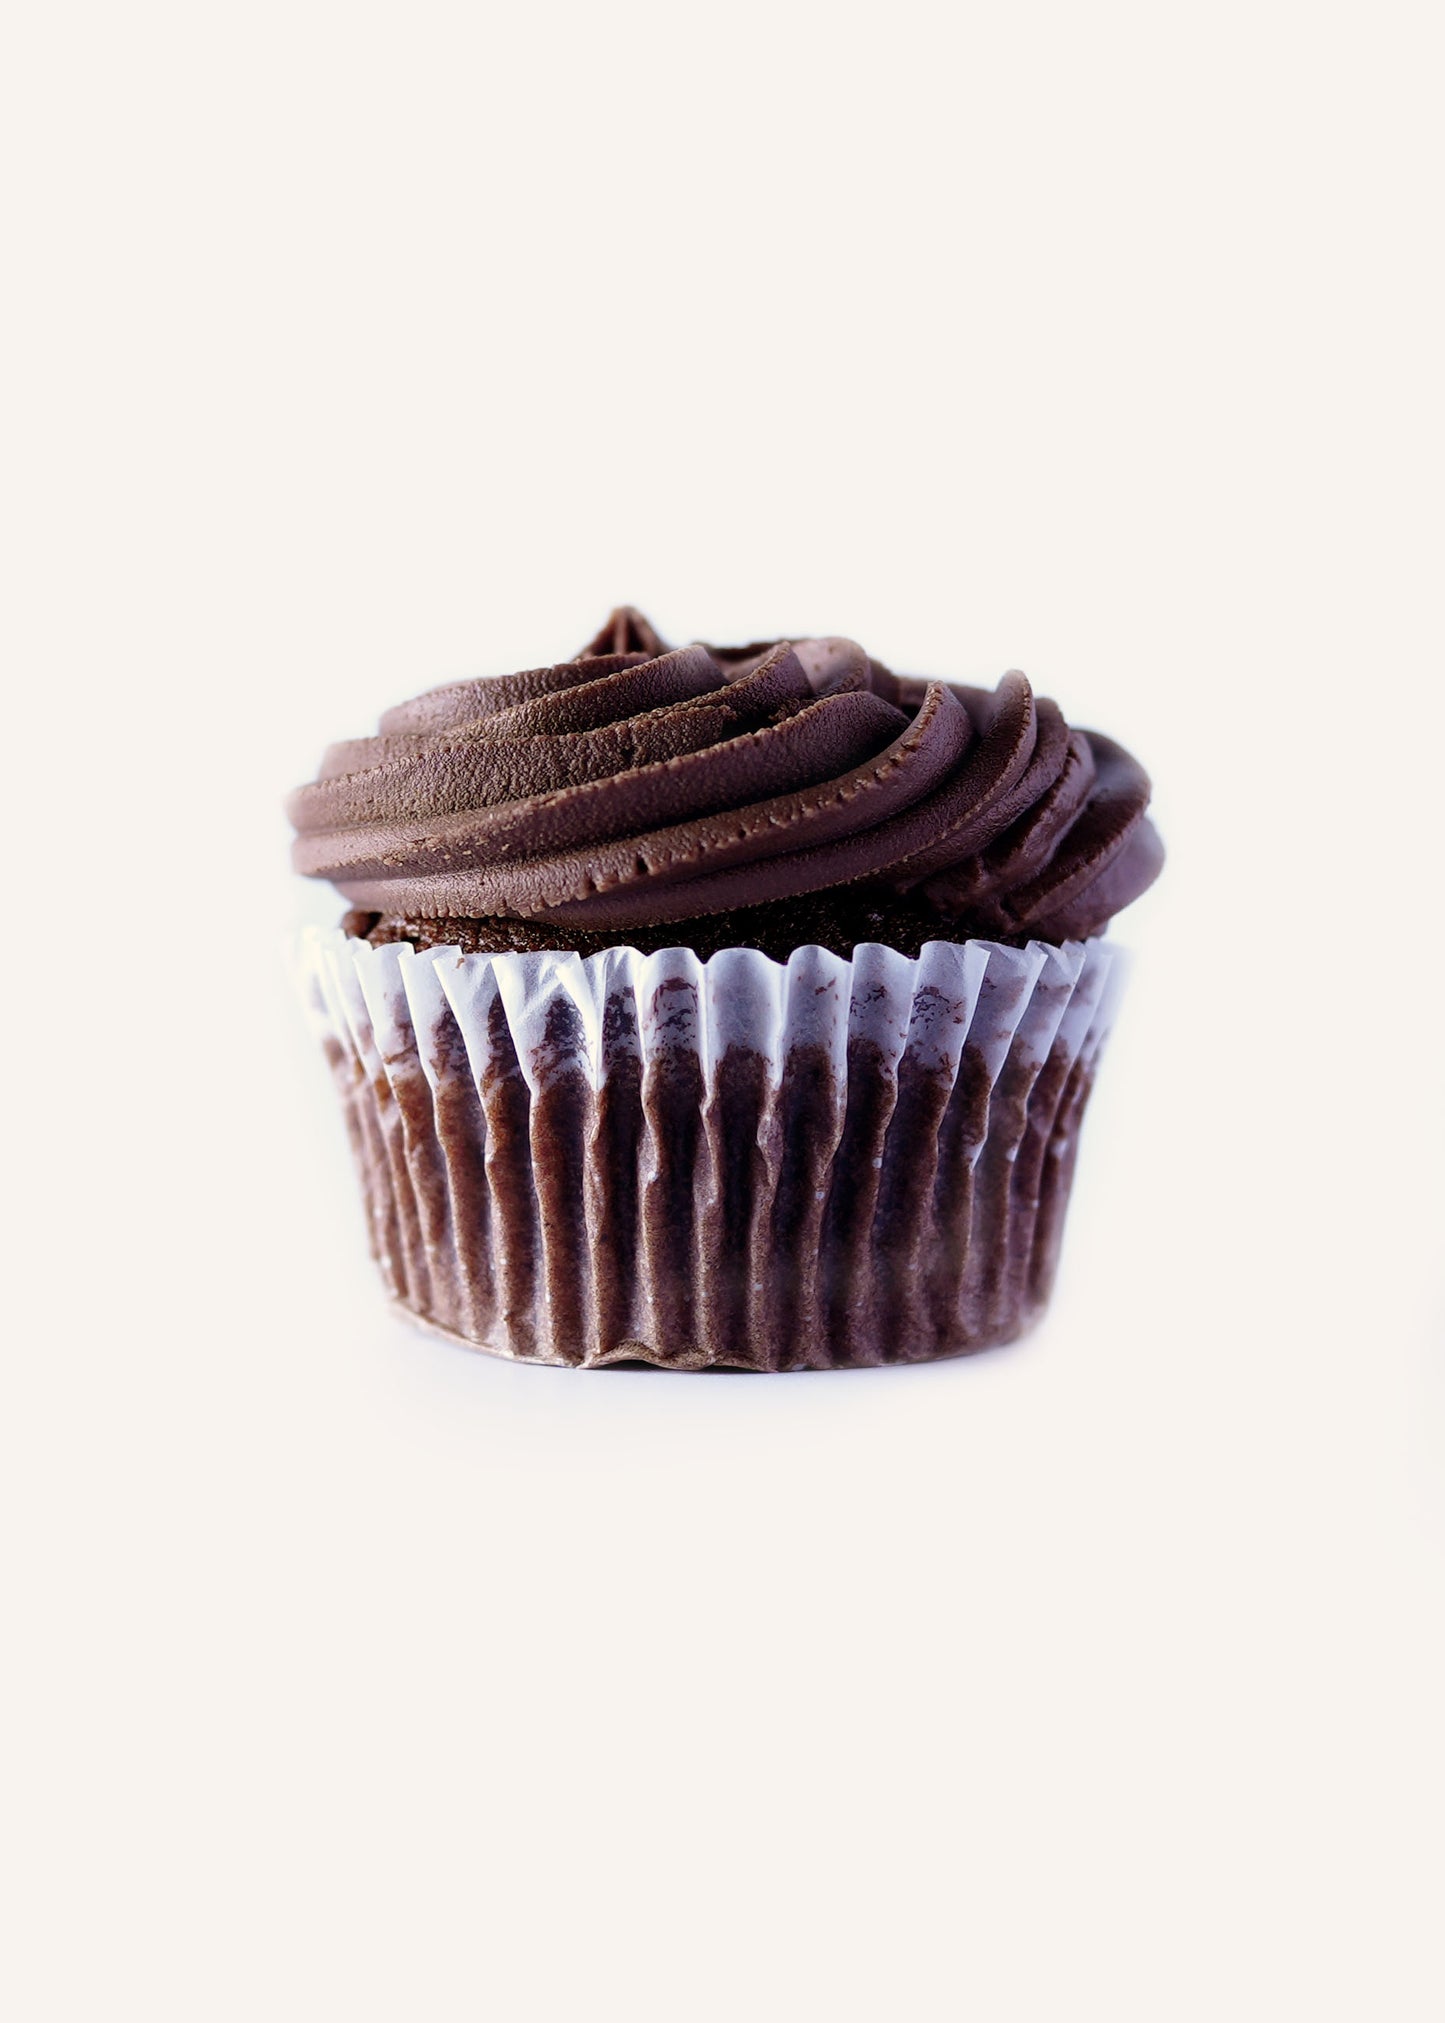 Chocolate Cupcakes with Chocolate Icing